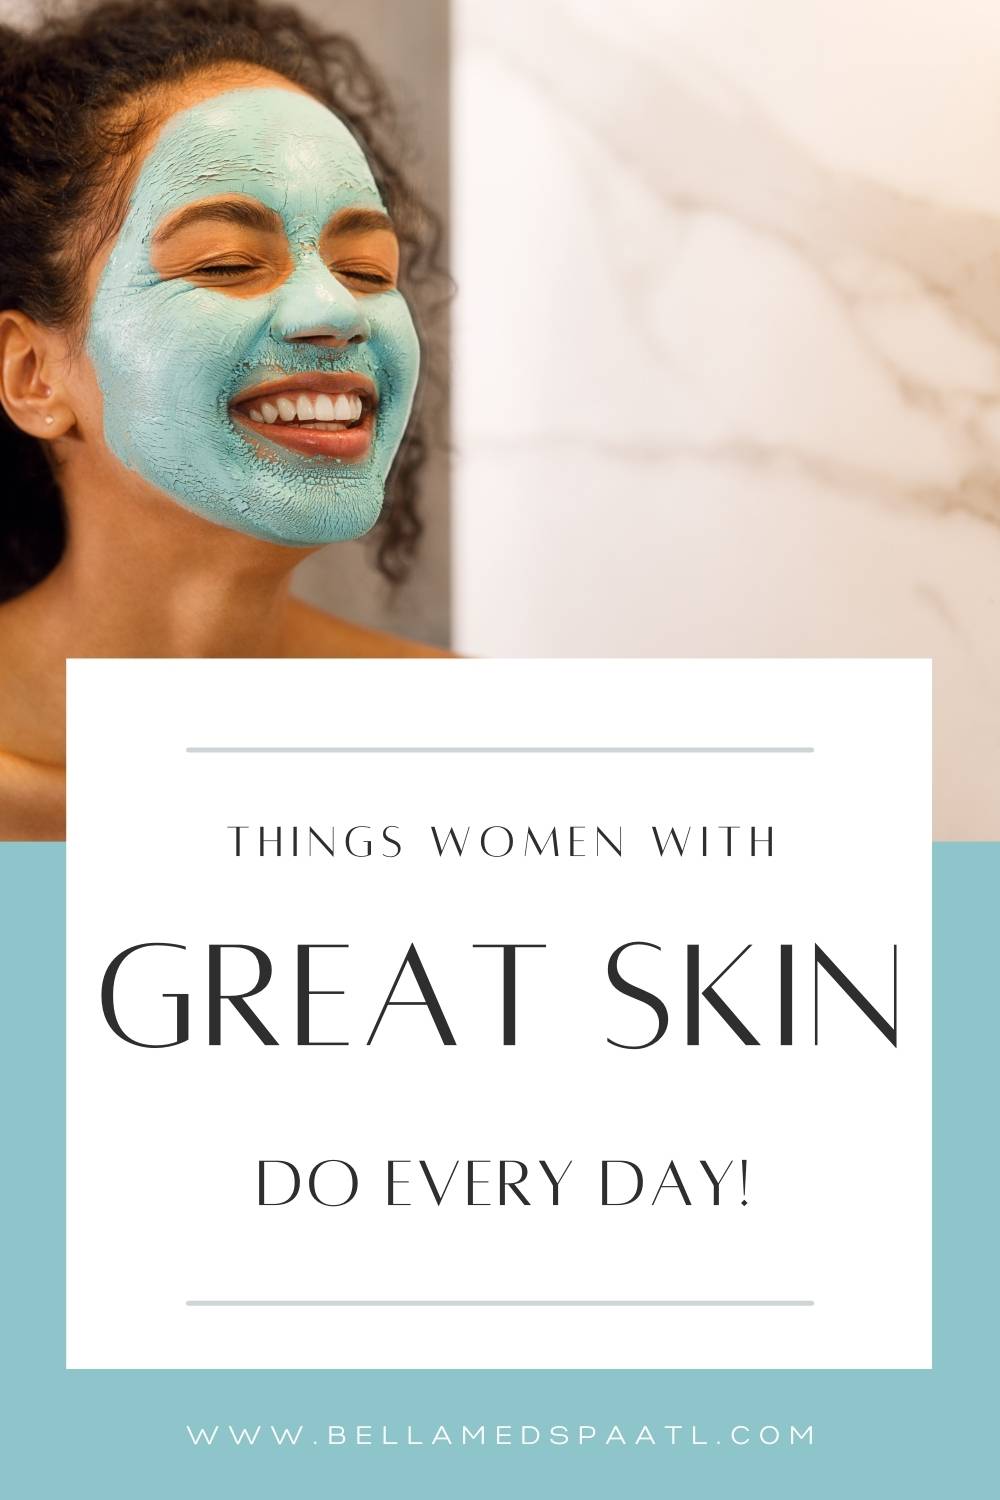 Ever wondered how some women always have great skin? If you're looking to improve the way your skin looks and feels, here are the best tips to get the perfect skincare routine that will help you achieve a great, glowing complextion!